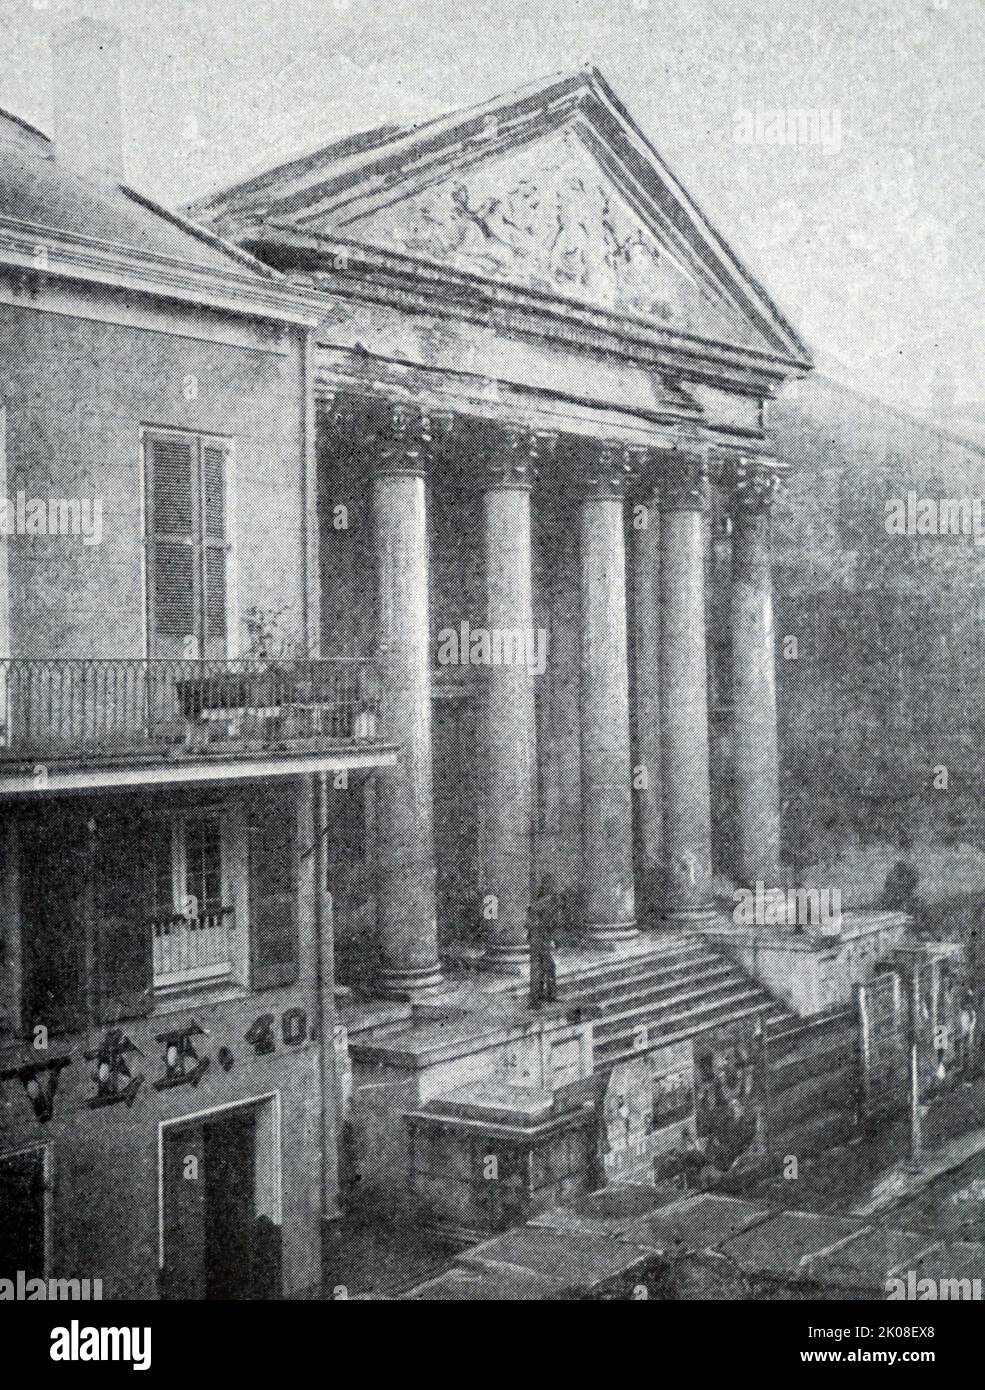 Old City Hall, New Orleans, where the officers of the Fleet demanded the surrender of the city. The capture of New Orleans (April 25 - May 1, 1862) during the American Civil War was a turning point in the war, which precipitated the capture of the Mississippi River Stock Photo